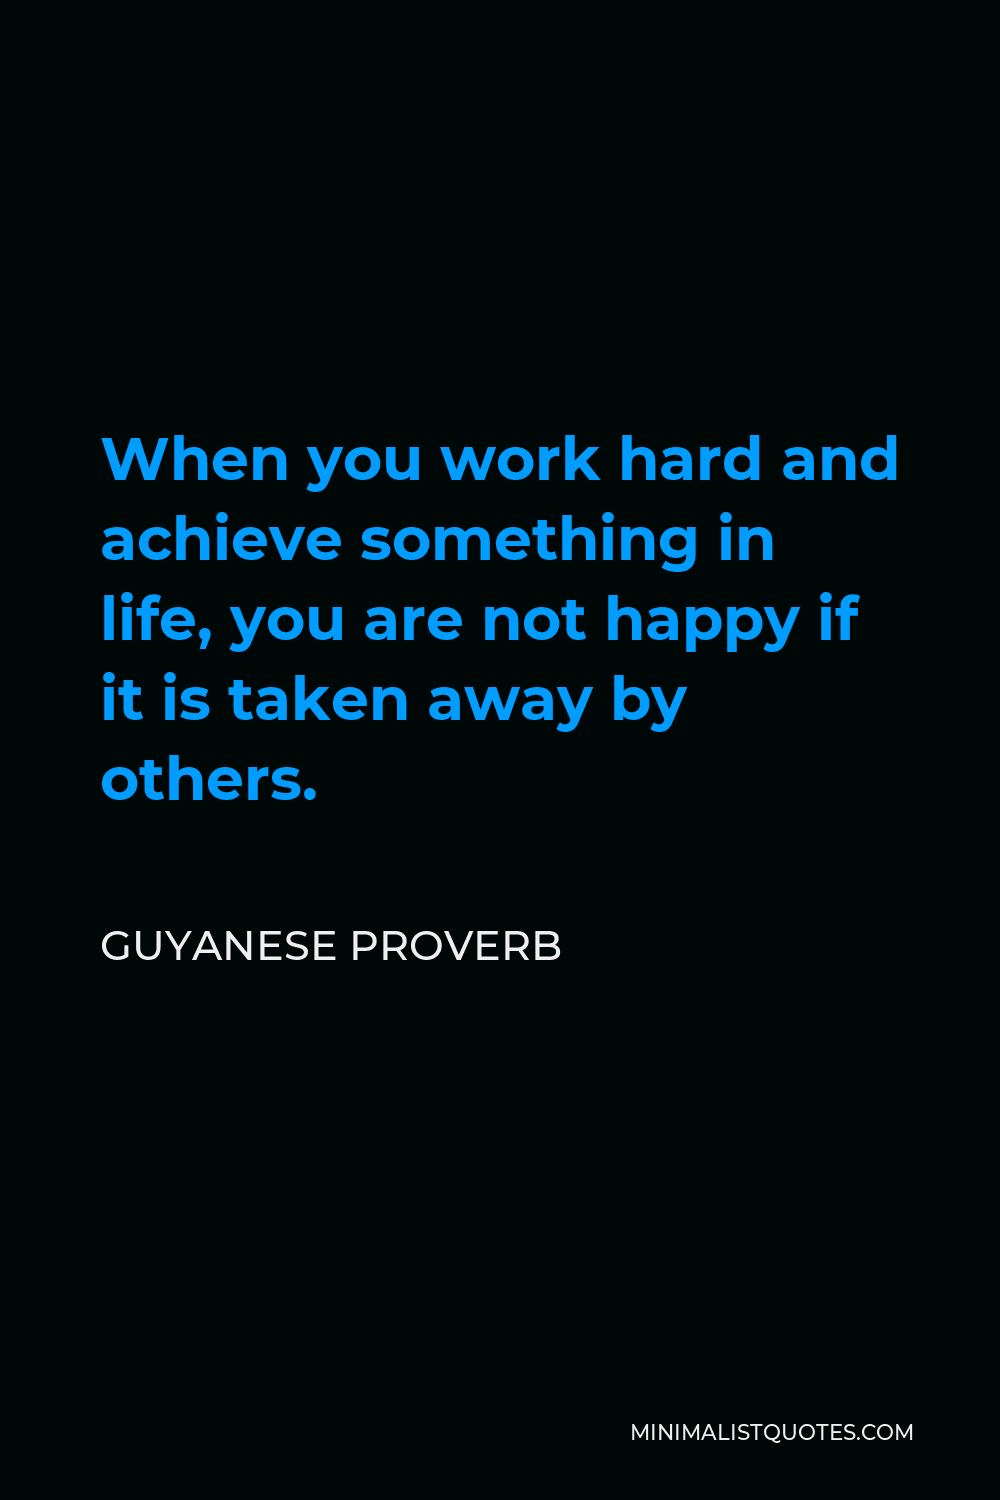 Guyanese Proverb Quote - When you work hard and achieve something in life, you are not happy if it is taken away by others.